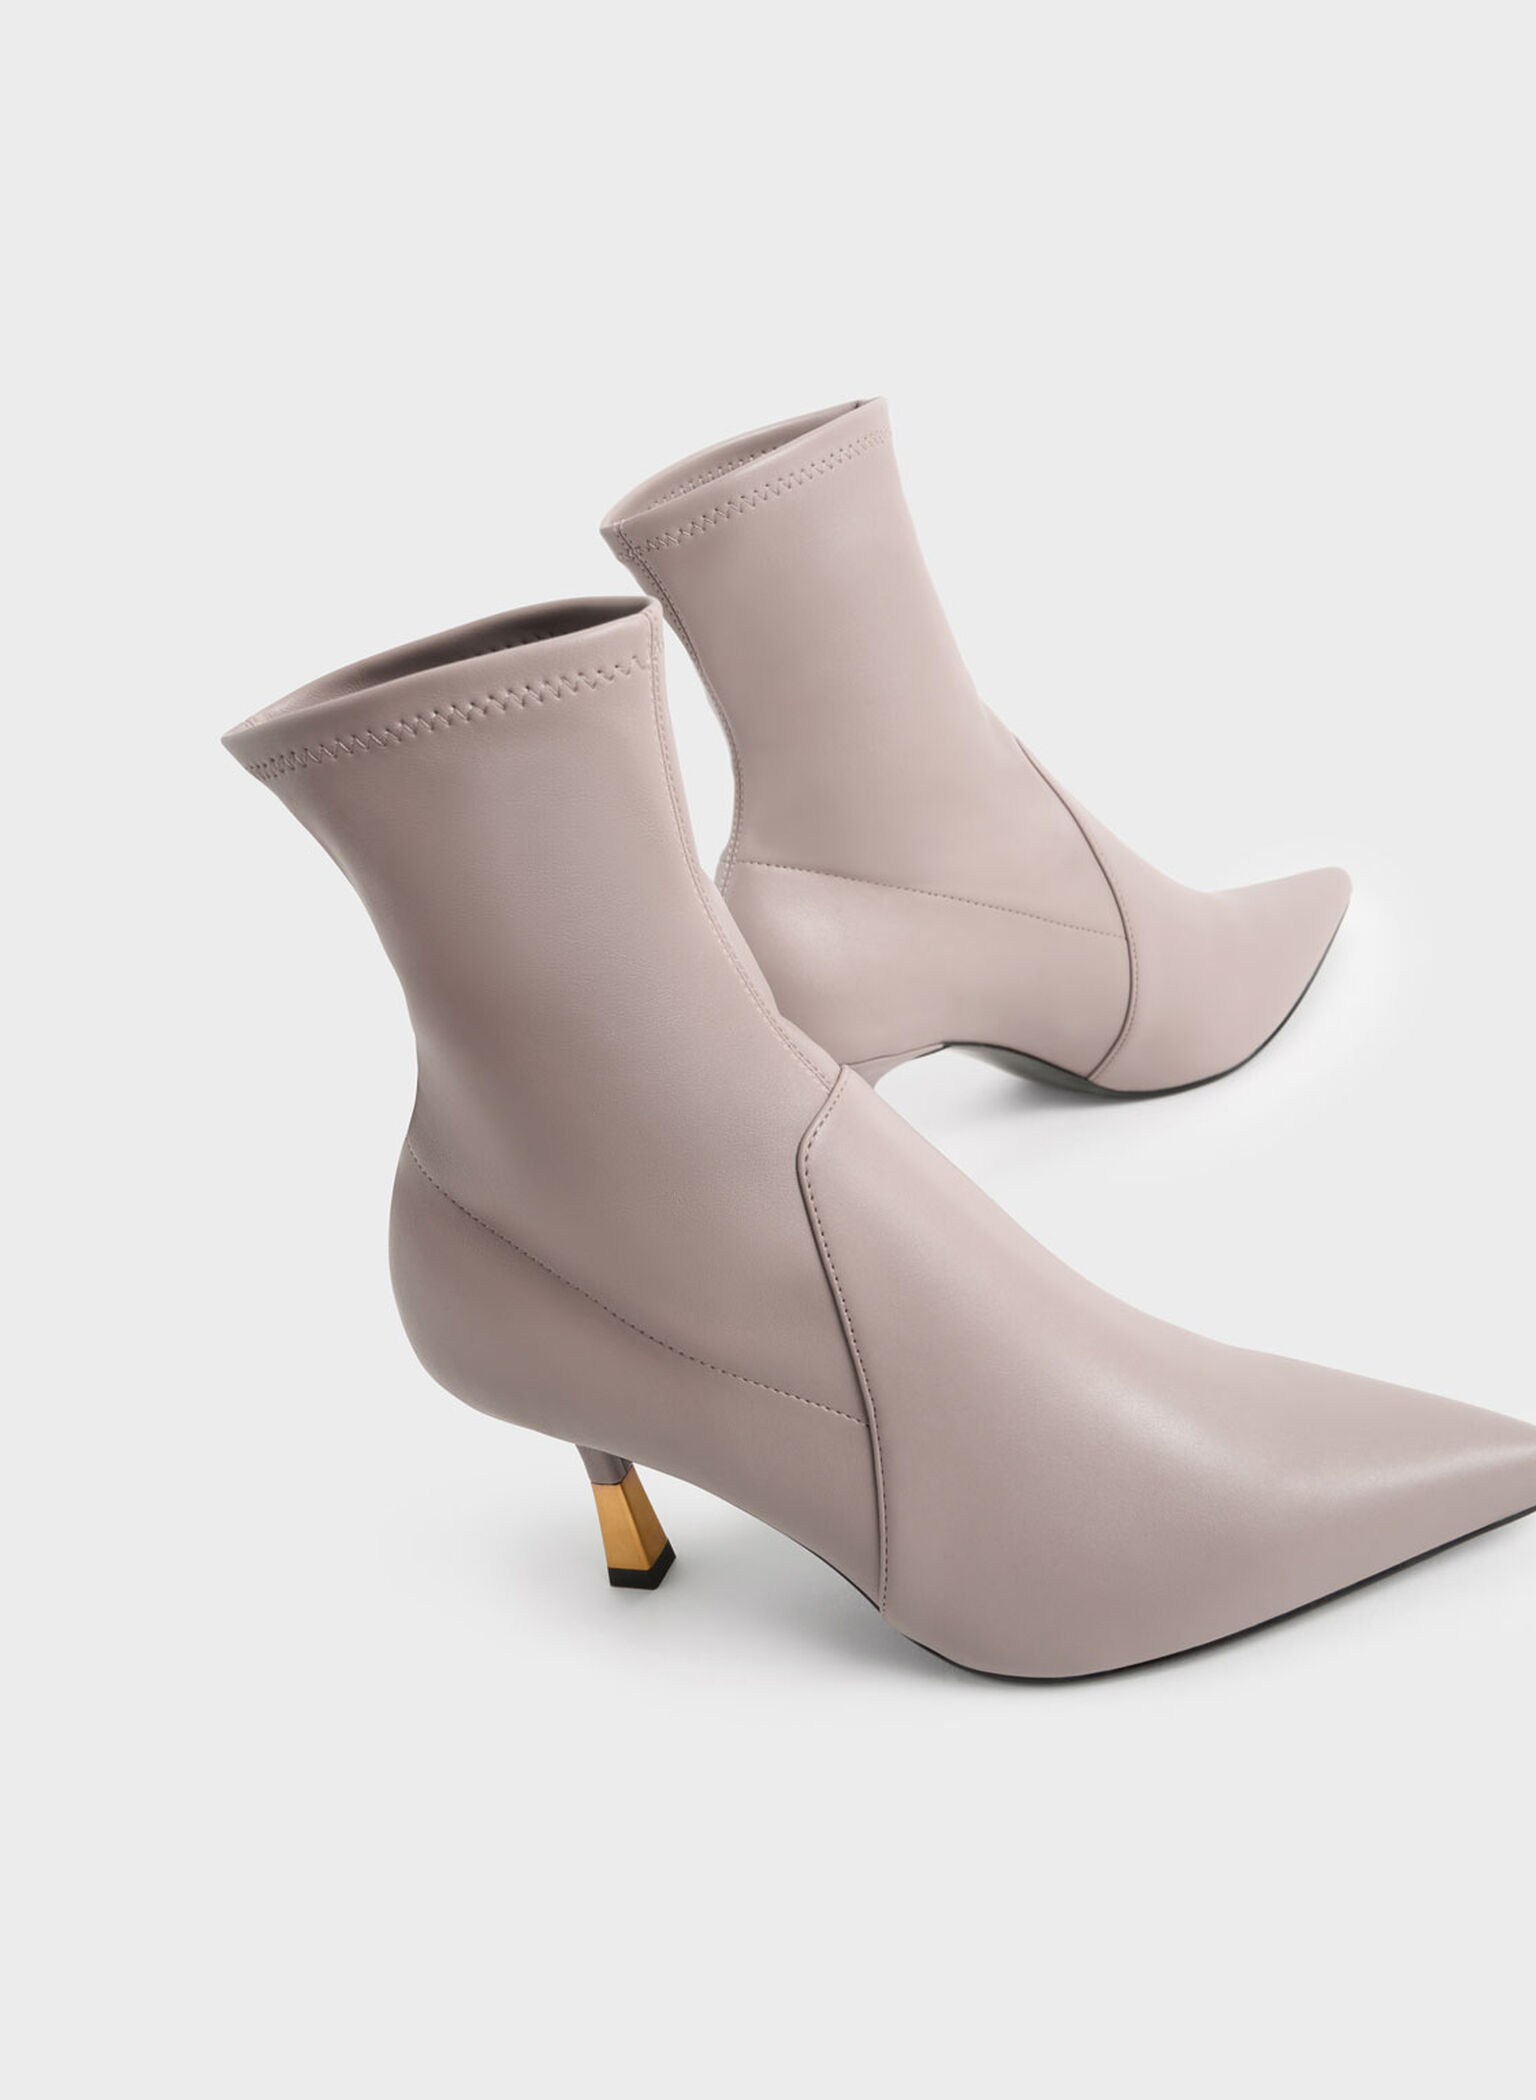 Kitten Heel Ankle Boots, Taupe, hi-res